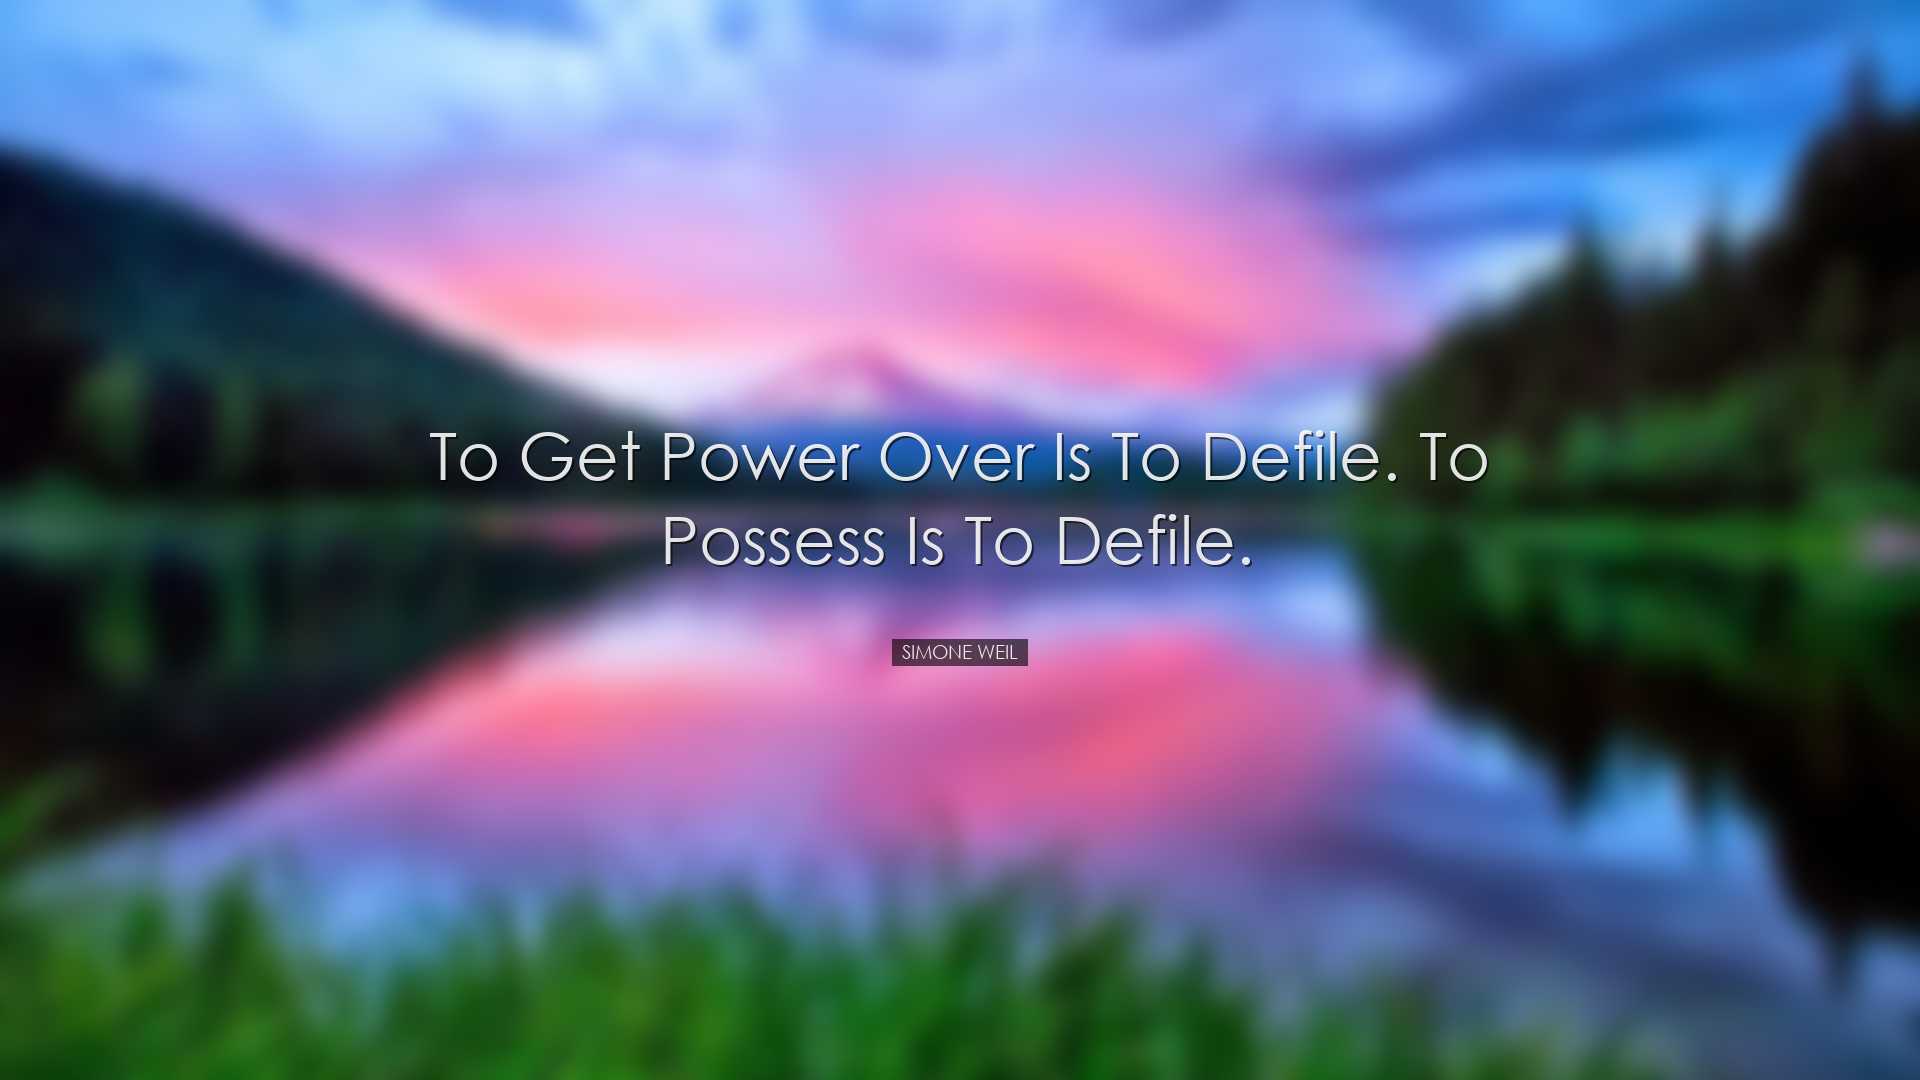 To get power over is to defile. To possess is to defile. - Simone